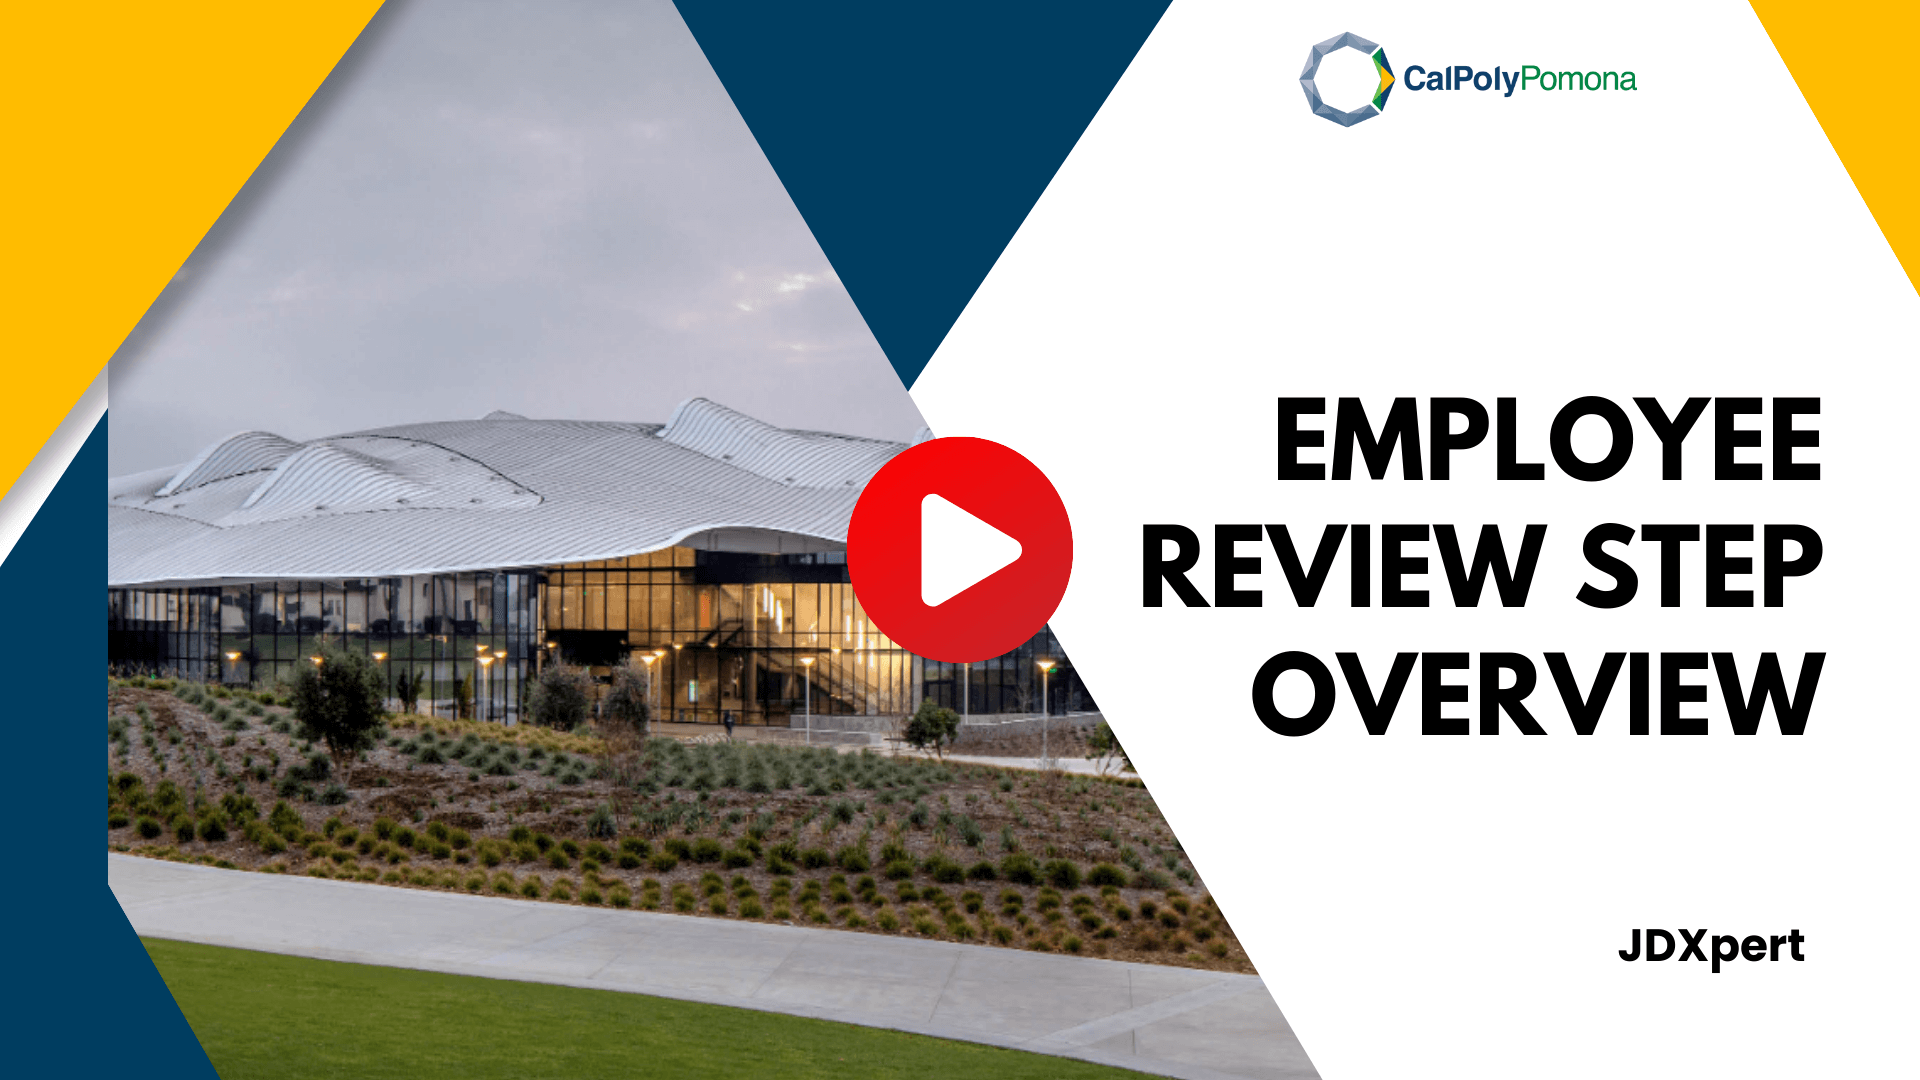 Employee Review Step Overview video